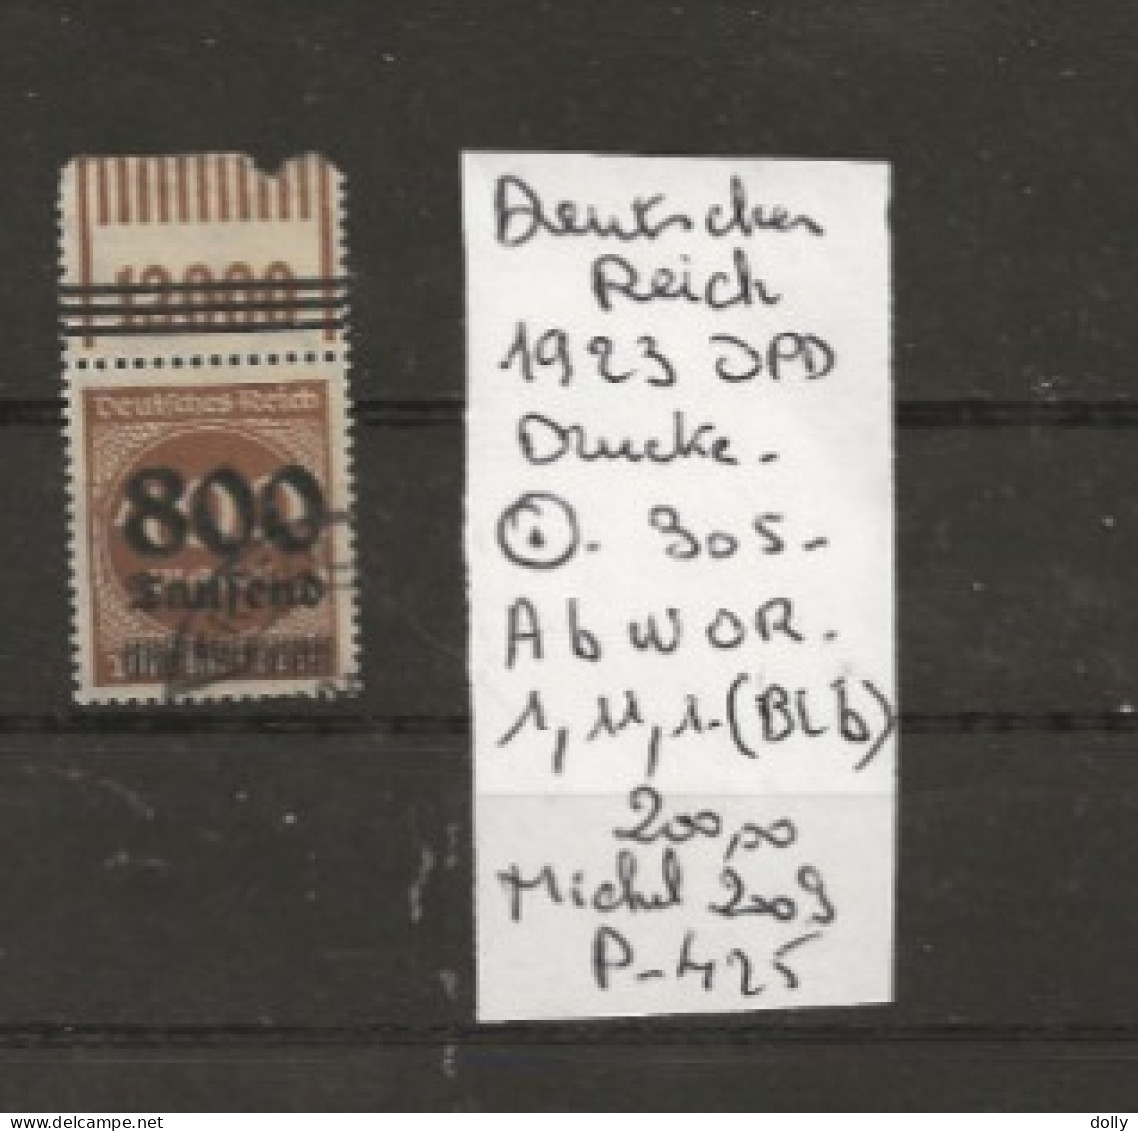 TIMBRE D ALLEMAGNE DEUTSCHES REICH 1923 Nr 305 OBLITERE OPD  A B W OR 1,11,1 COTE 200.00 € - 1922-1923 Local Issues